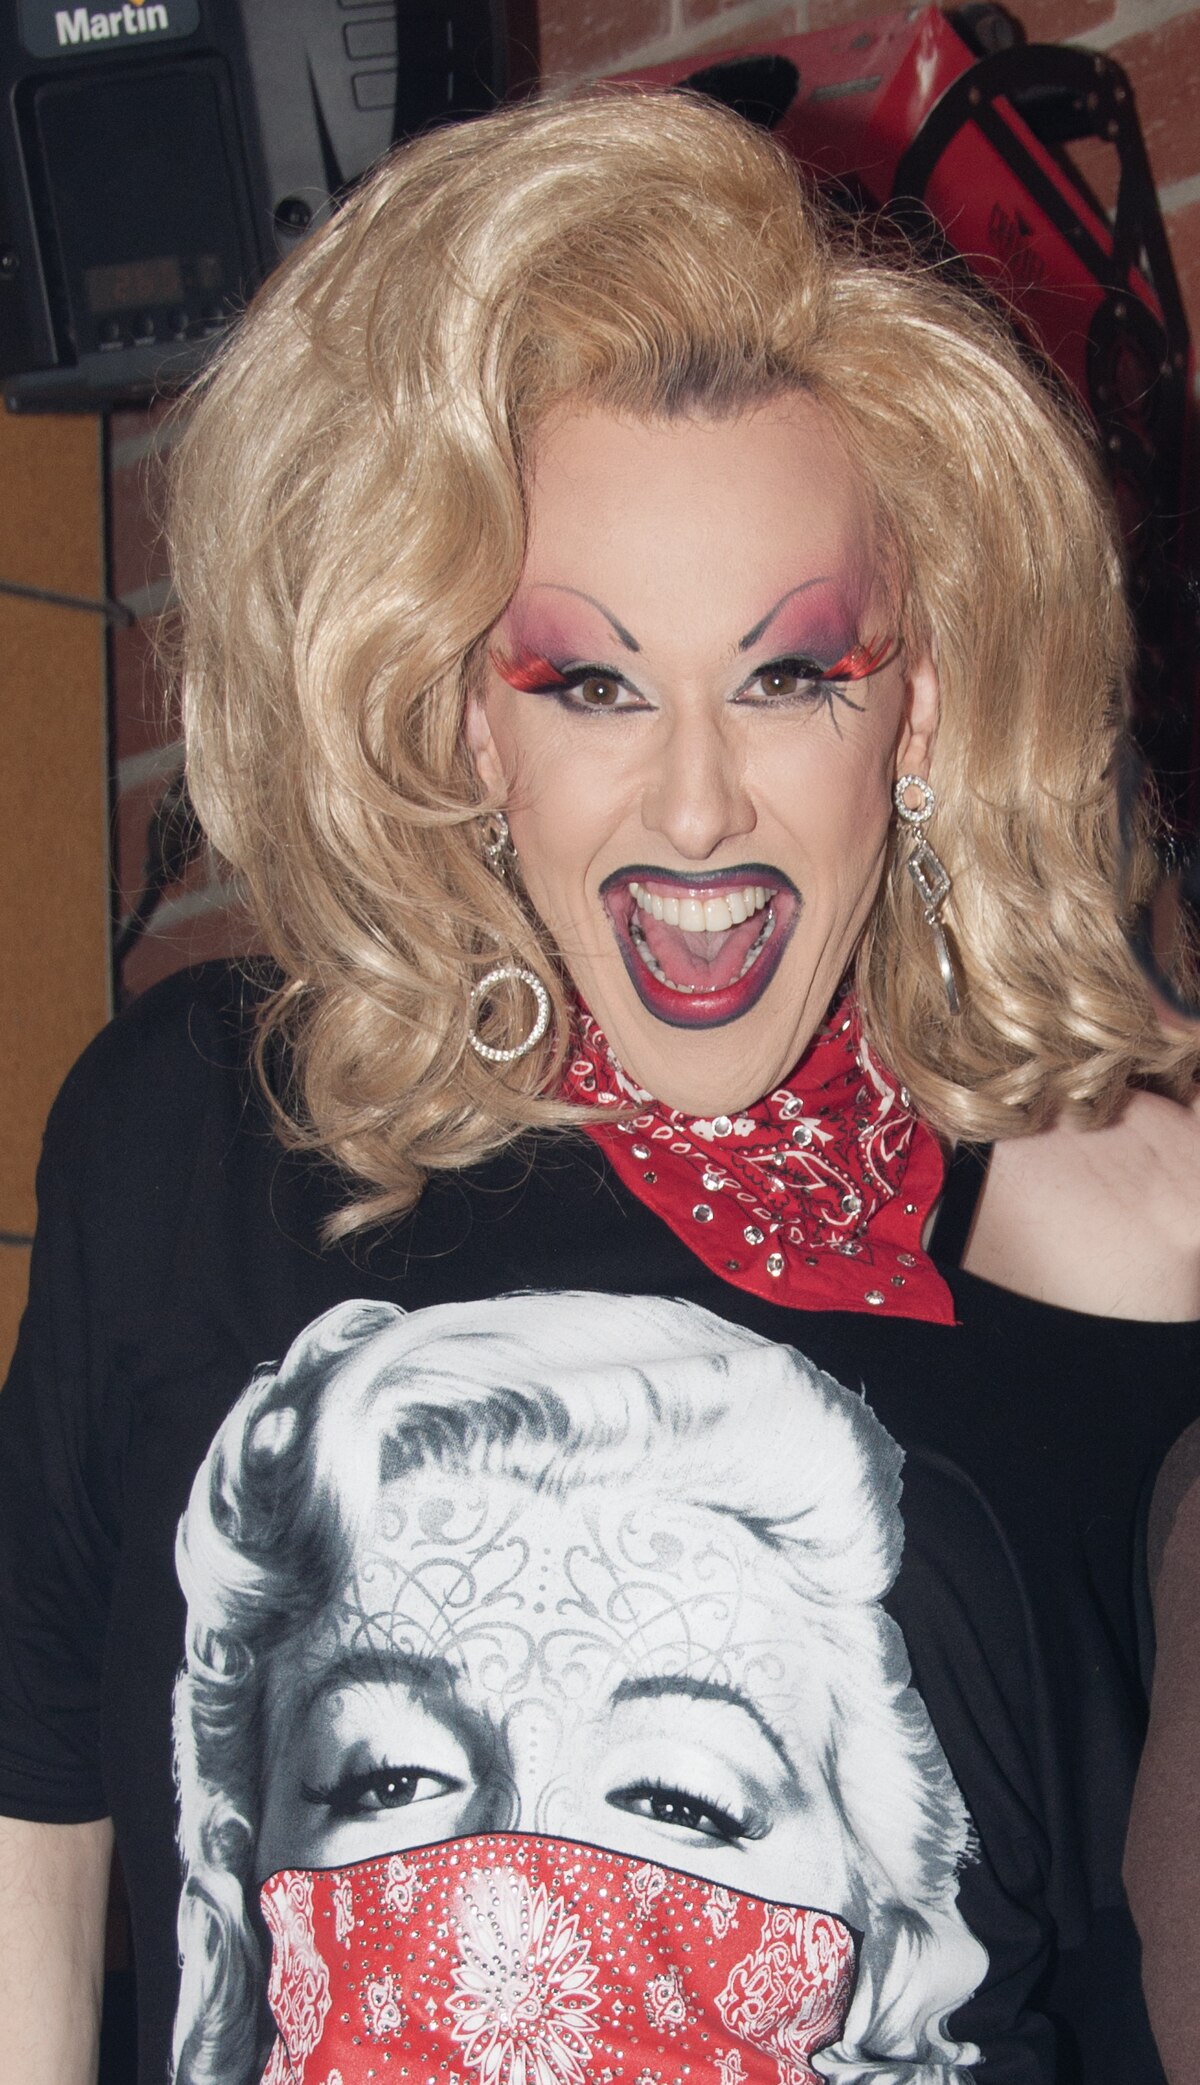 chase mccloud recommends chi chi larue movies pic